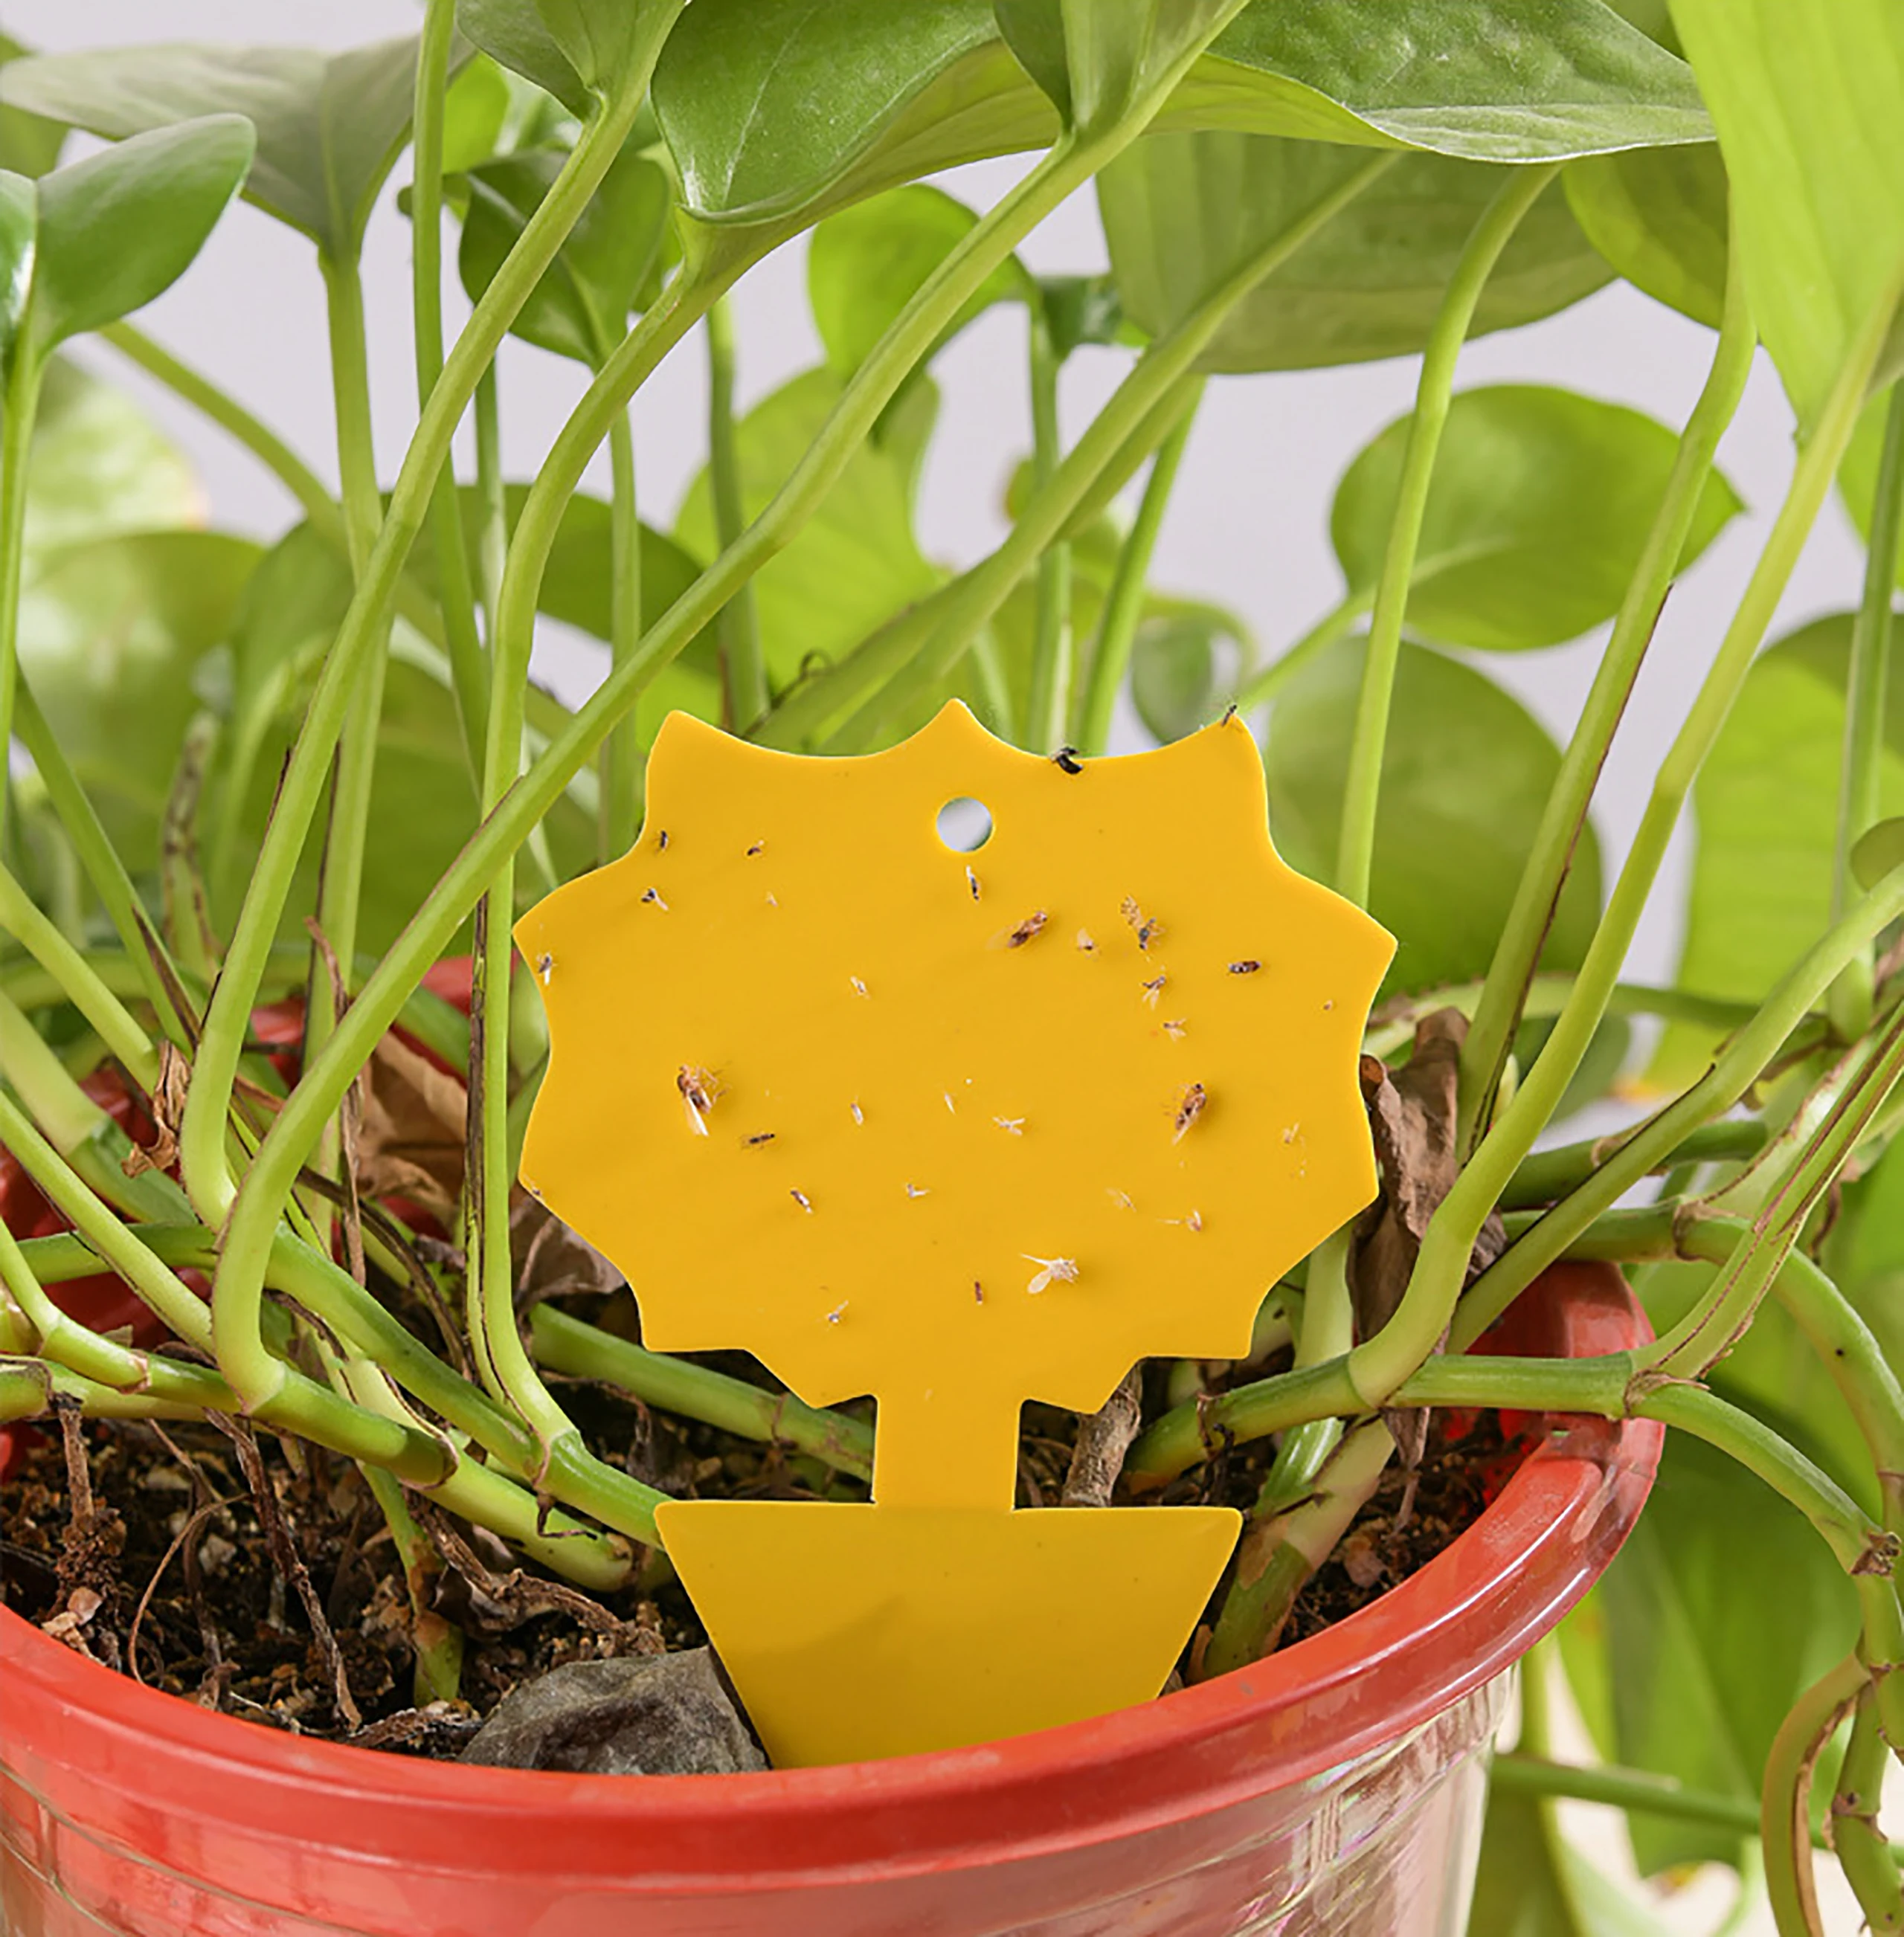 https://ae01.alicdn.com/kf/Sad77459dffca4dd29d7dd624f7dcdde4b/Flying-Worm-Sticky-Trap-Dual-Sided-Self-adhesive-Winged-Insect-Bug-Mosquito-Catcher-Garden-Indoor-Outdoor.jpg